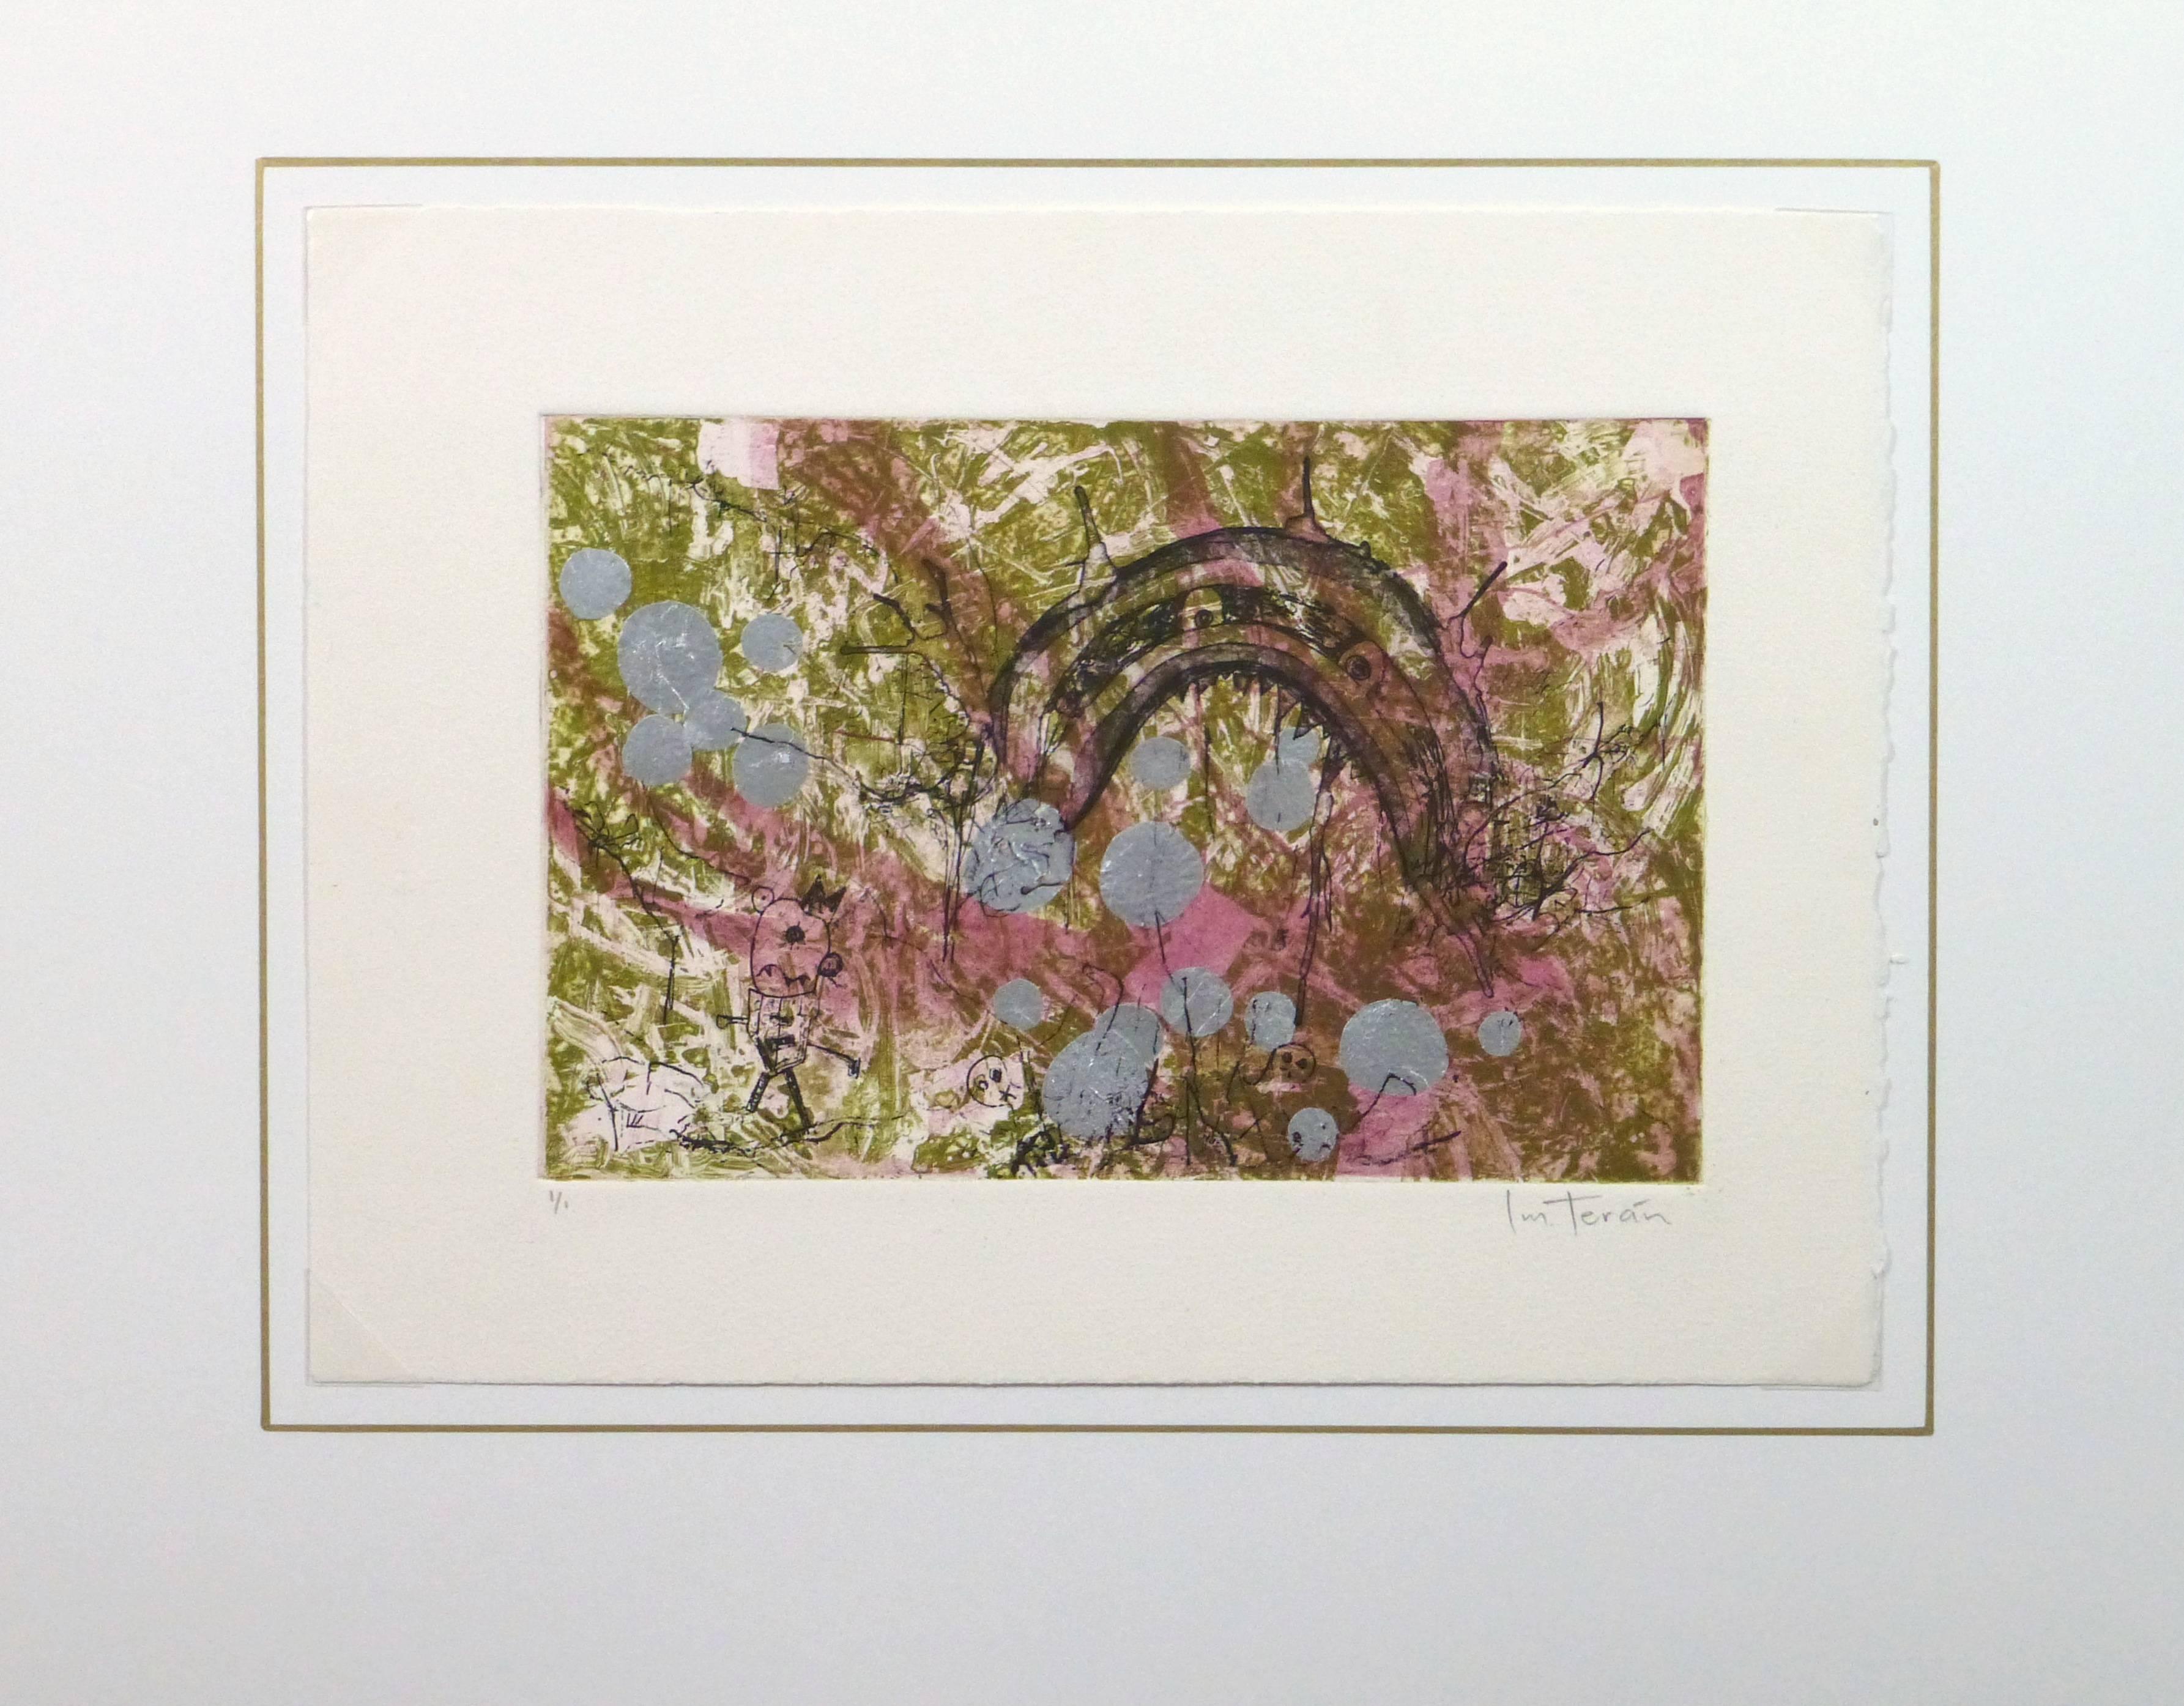 Fanciful aquatint etching with aluminum transfer, features abstract figures and aluminum bubbles mixed with green and magenta tones by Imelda Teran, circa 1995. Signed lower right and numbered 1 of 1 lower left.

Original one-of-a-kind artwork on